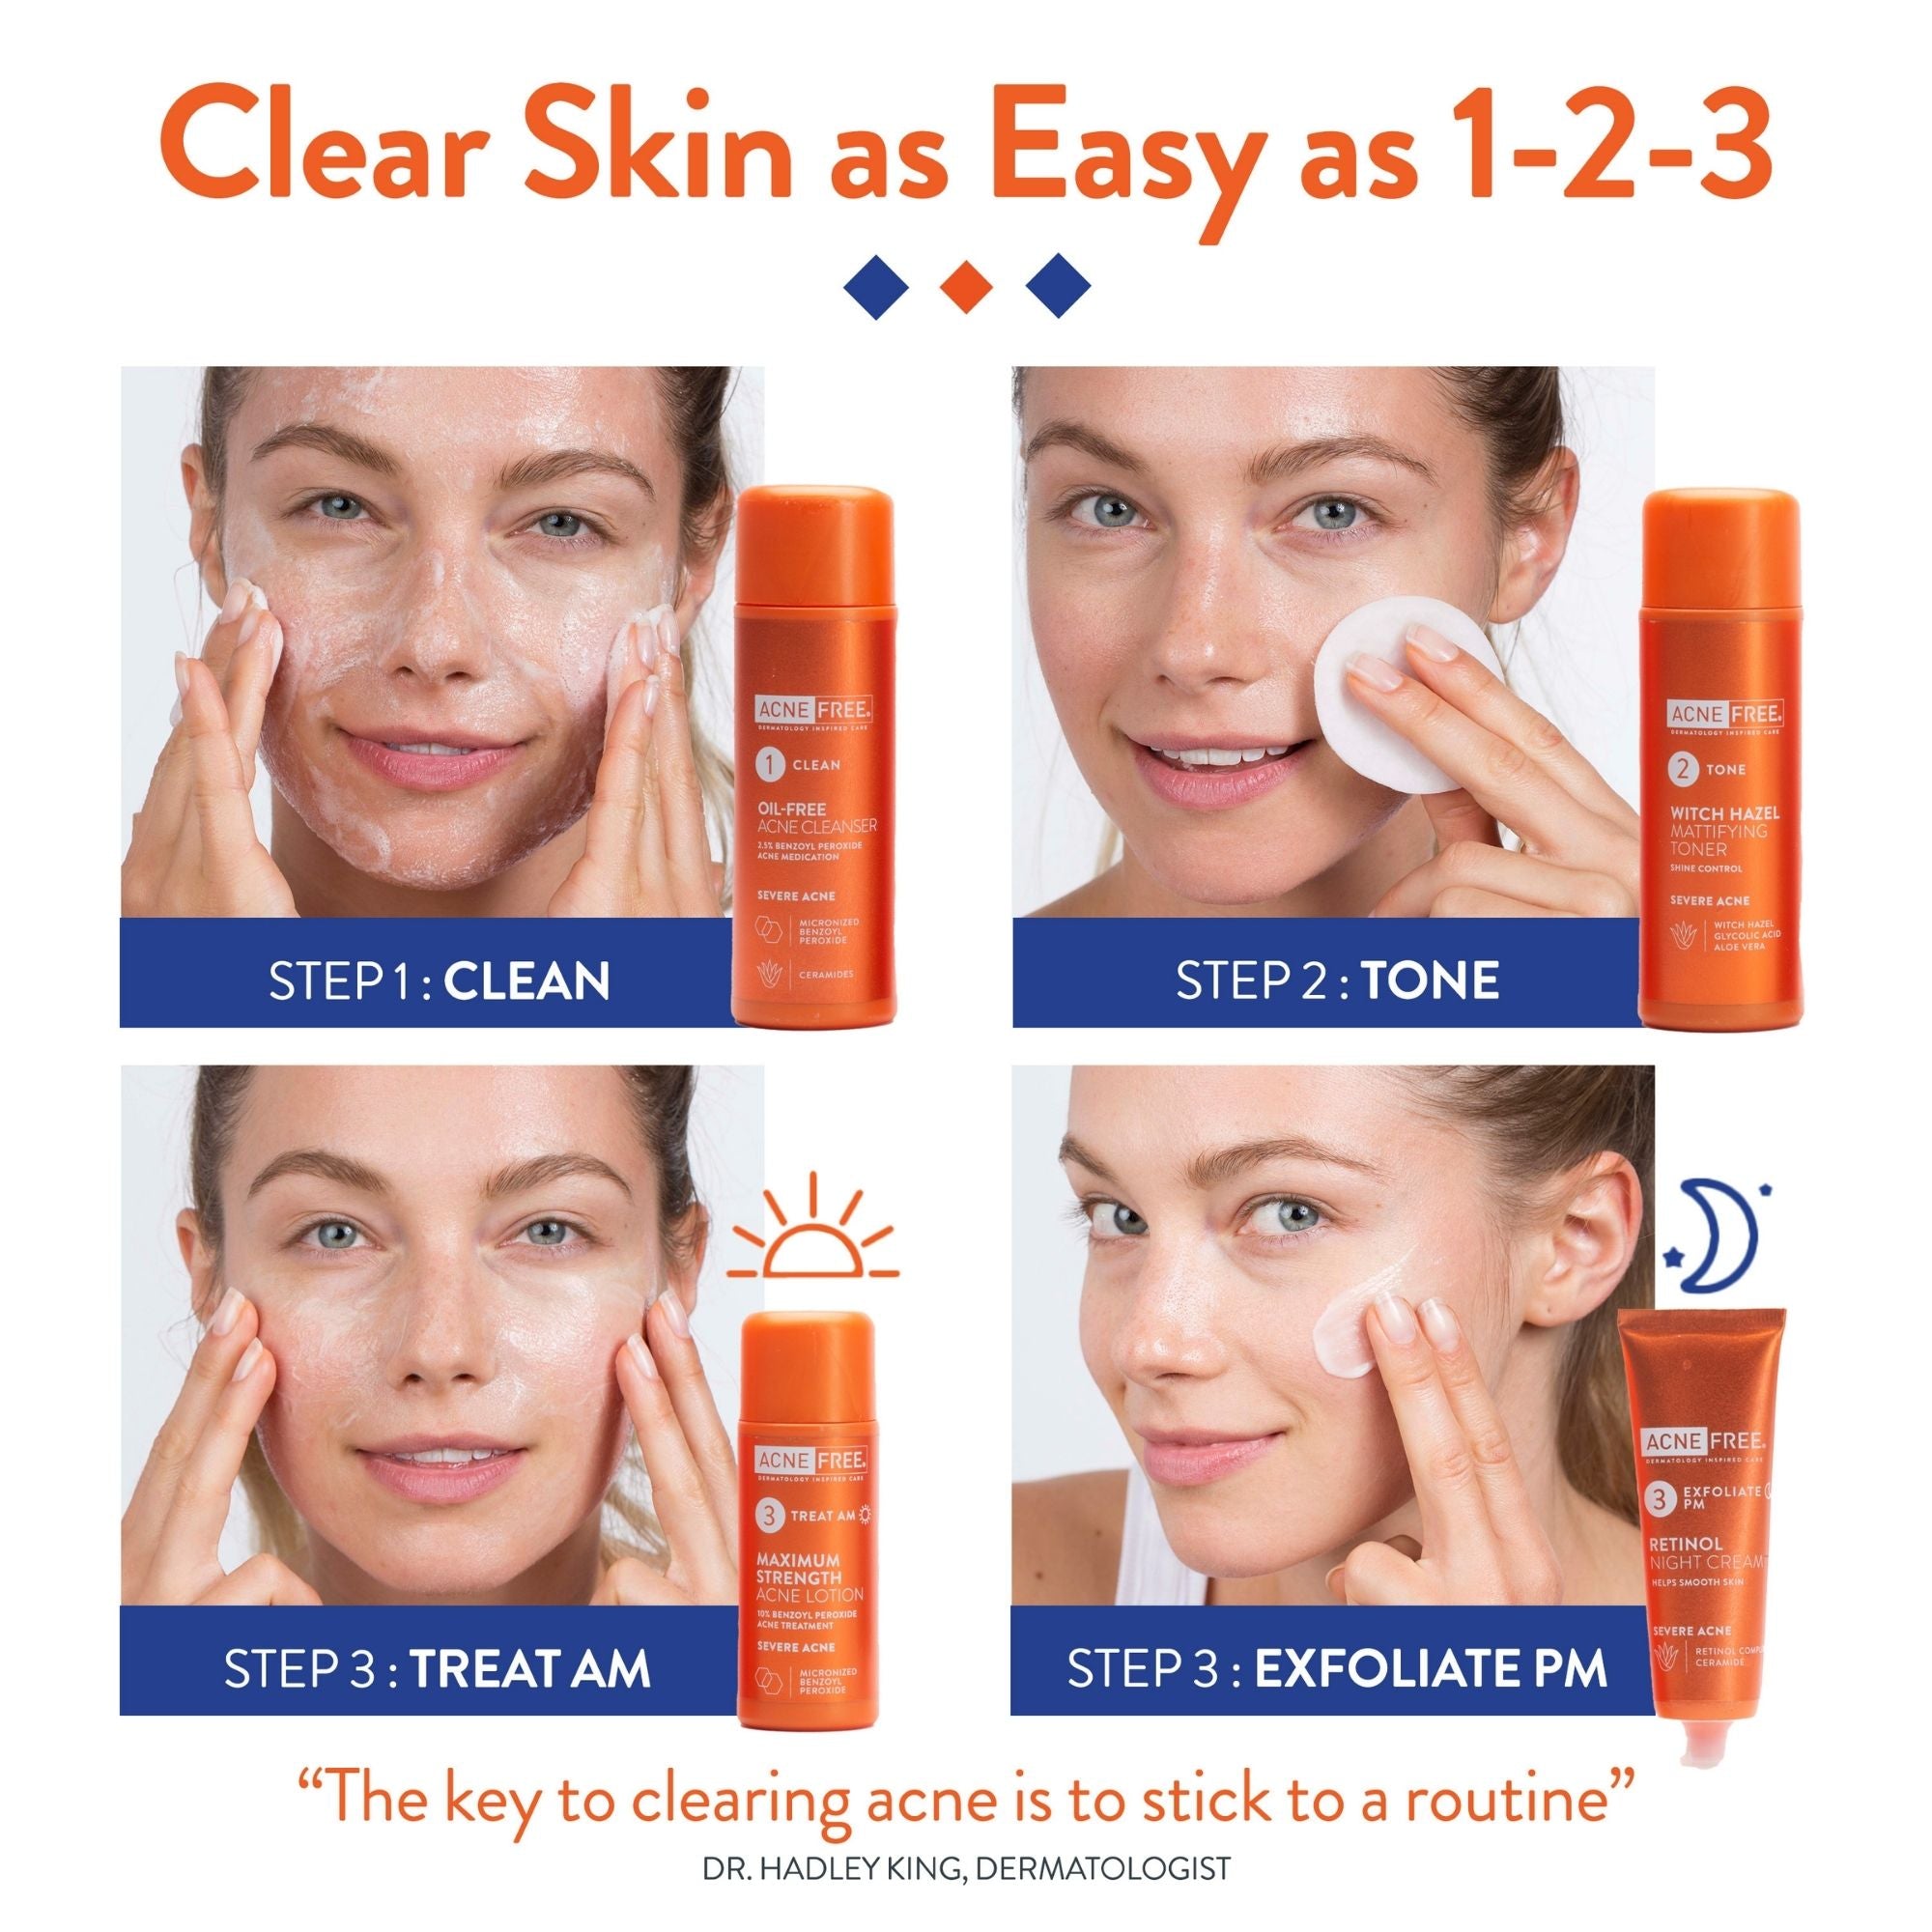 Severe Acne 24 HR Clearing System 4PC Kit